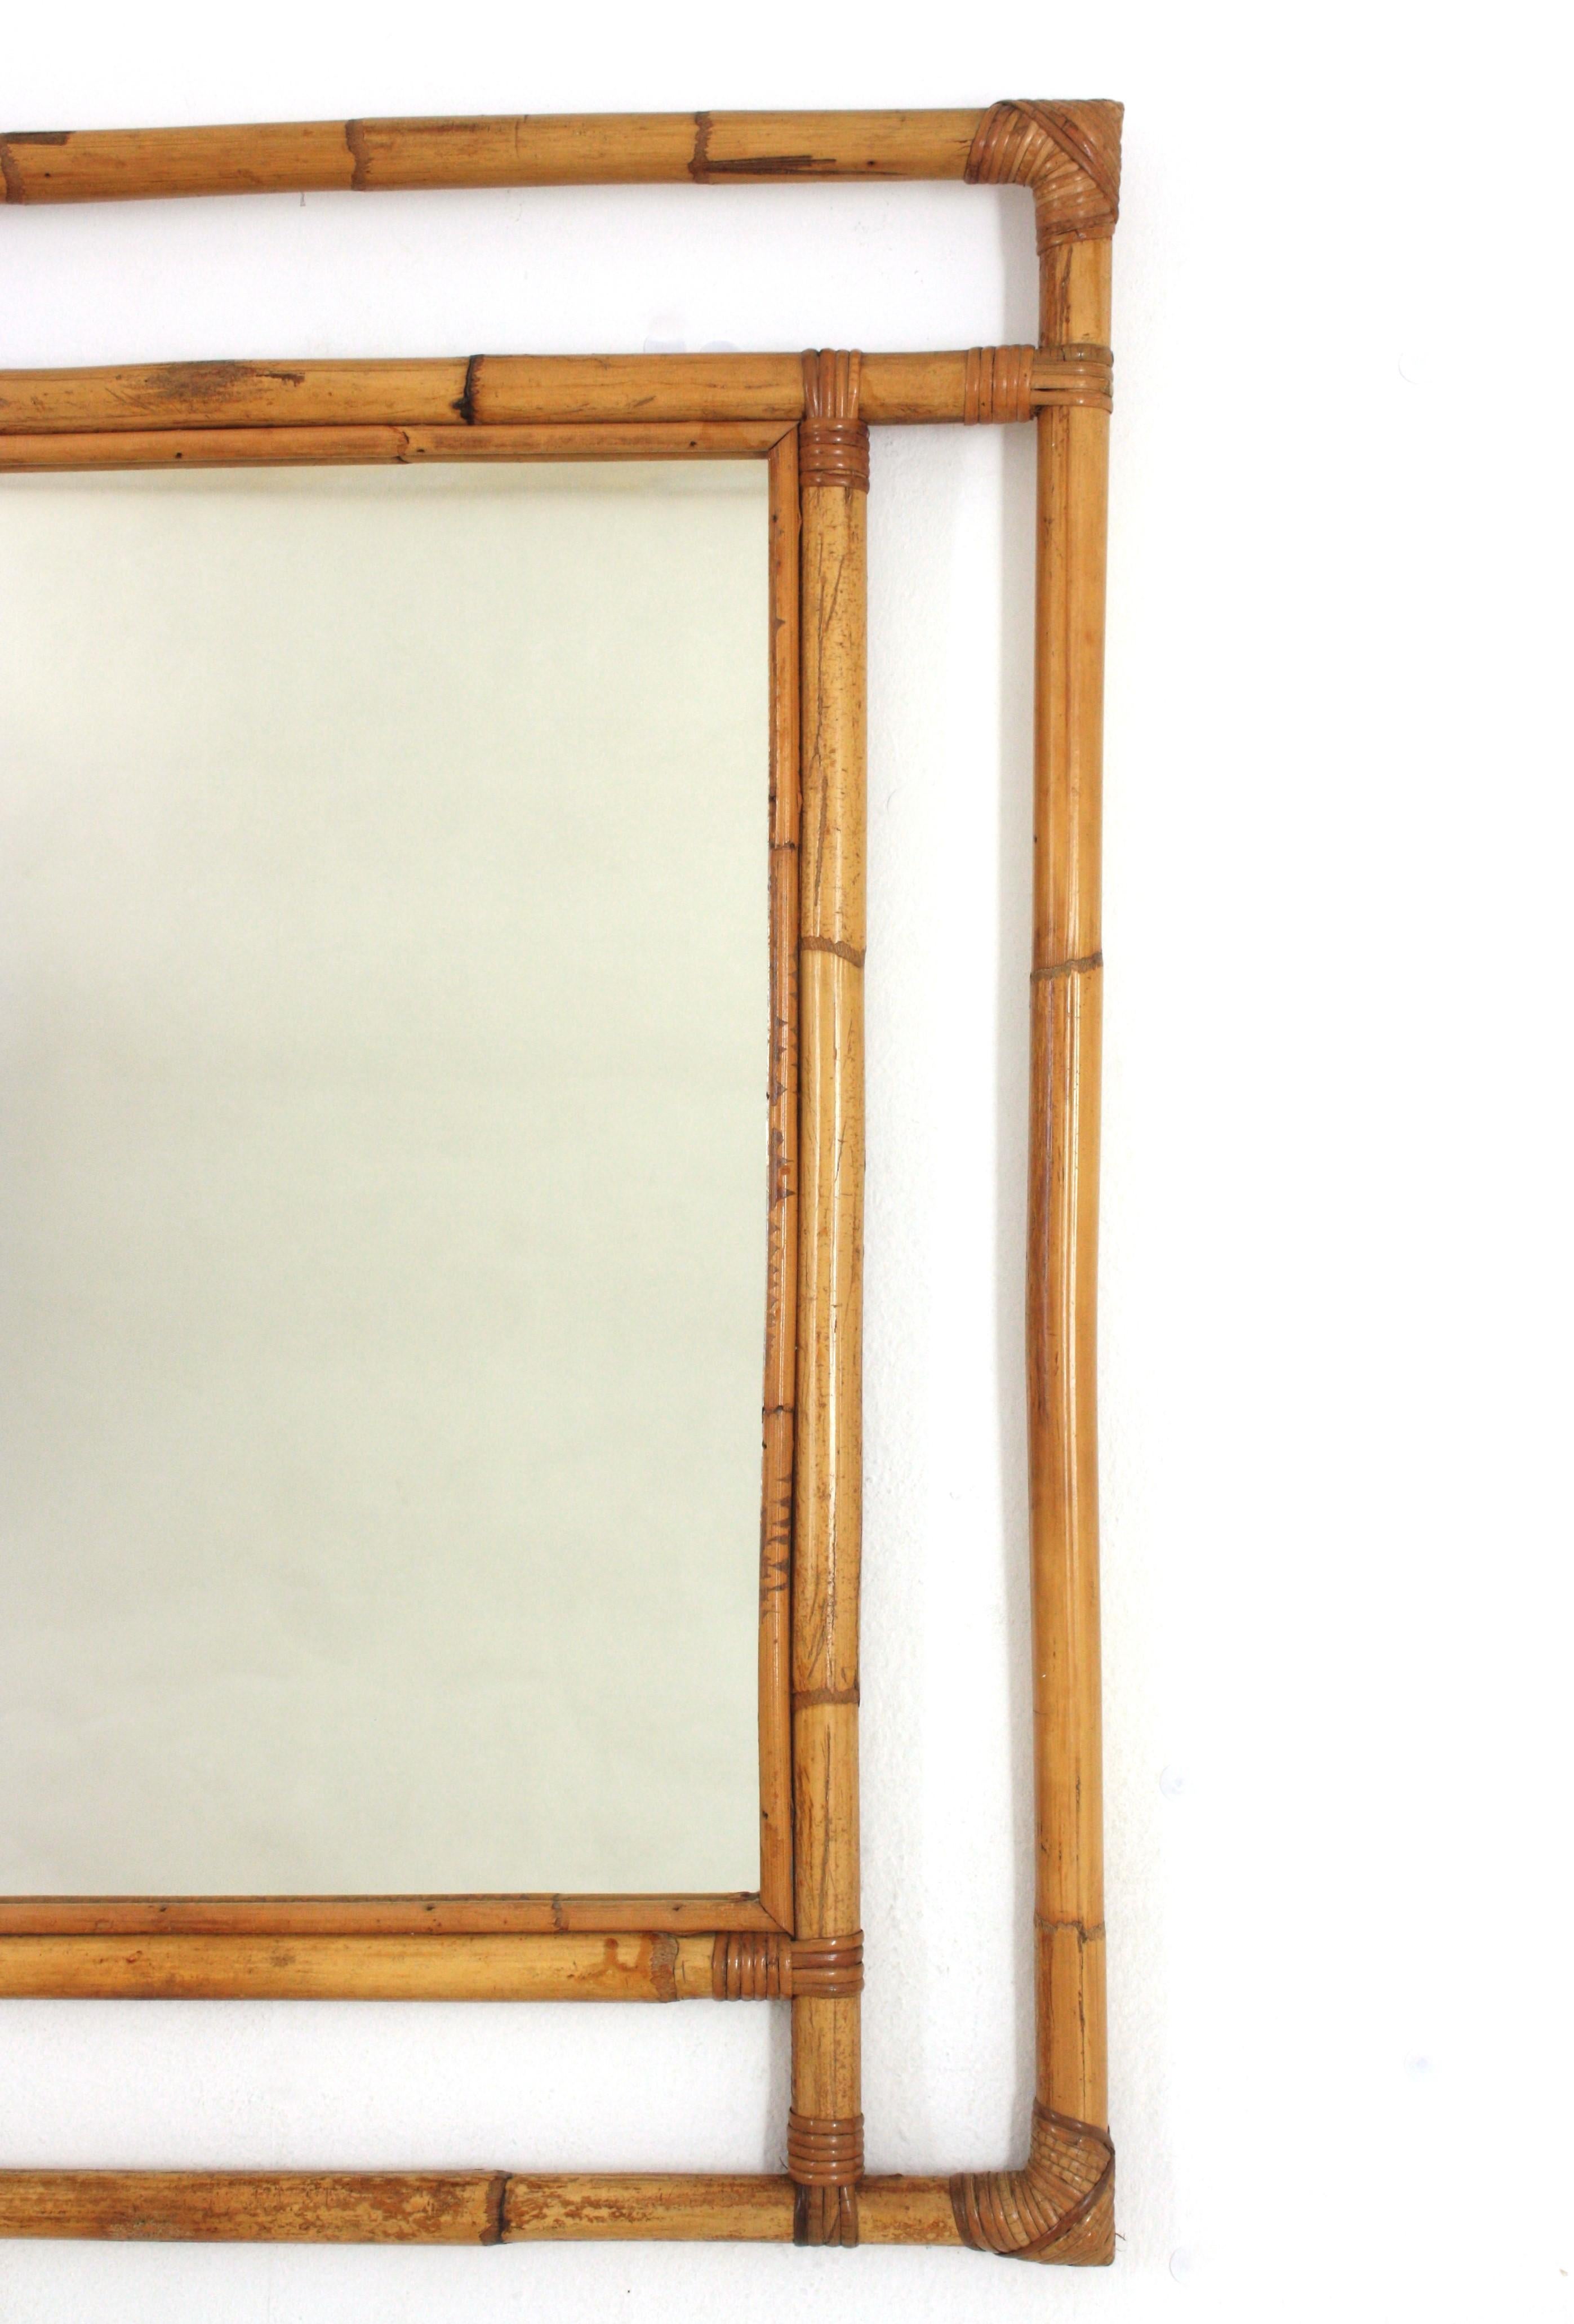 20th Century Spanish Large Rattan Rectangular Mirror with Geometric Frame, 1960s For Sale